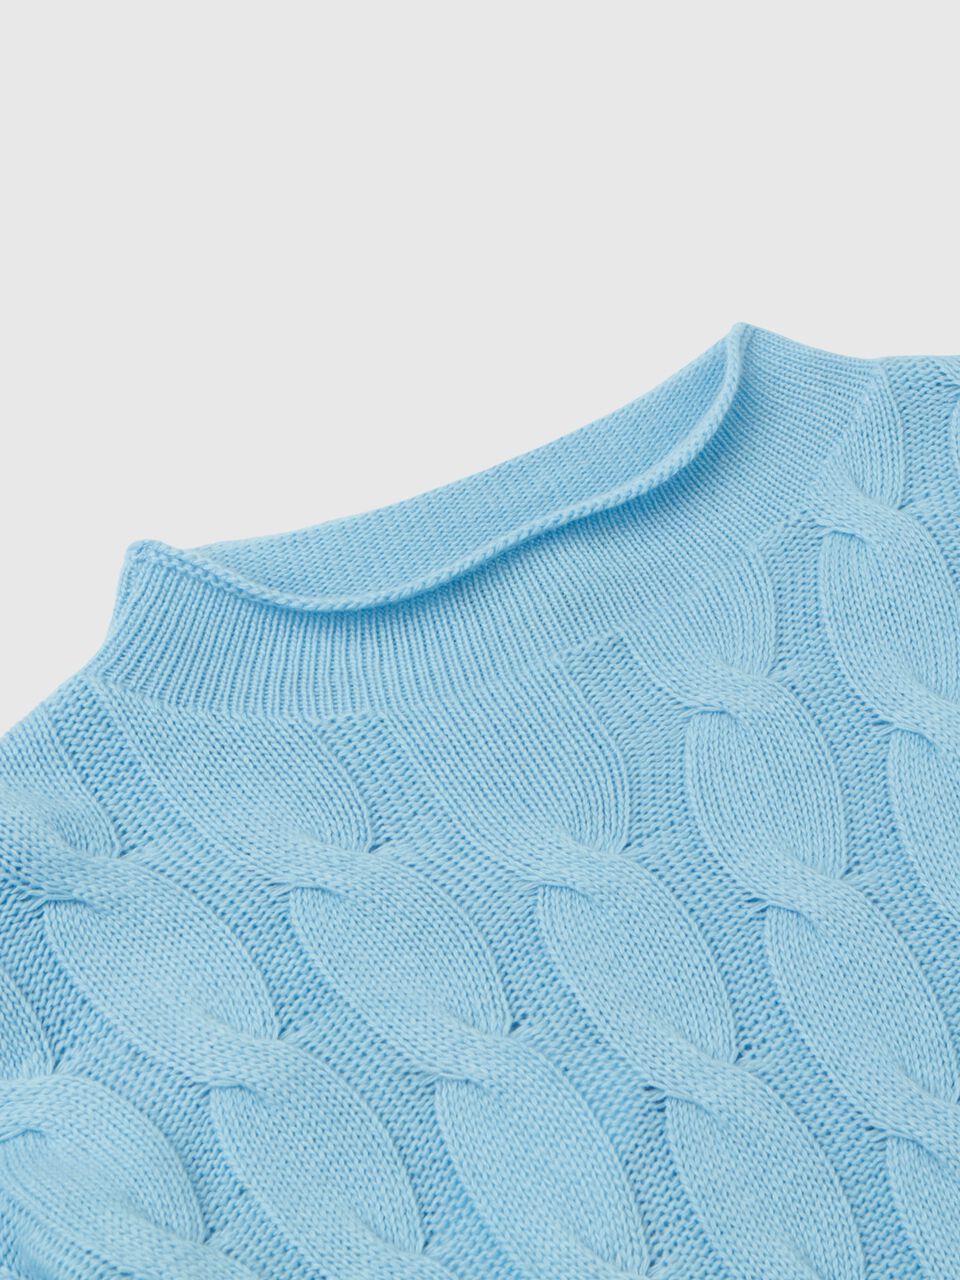 Cable knit sweater - Light Blue